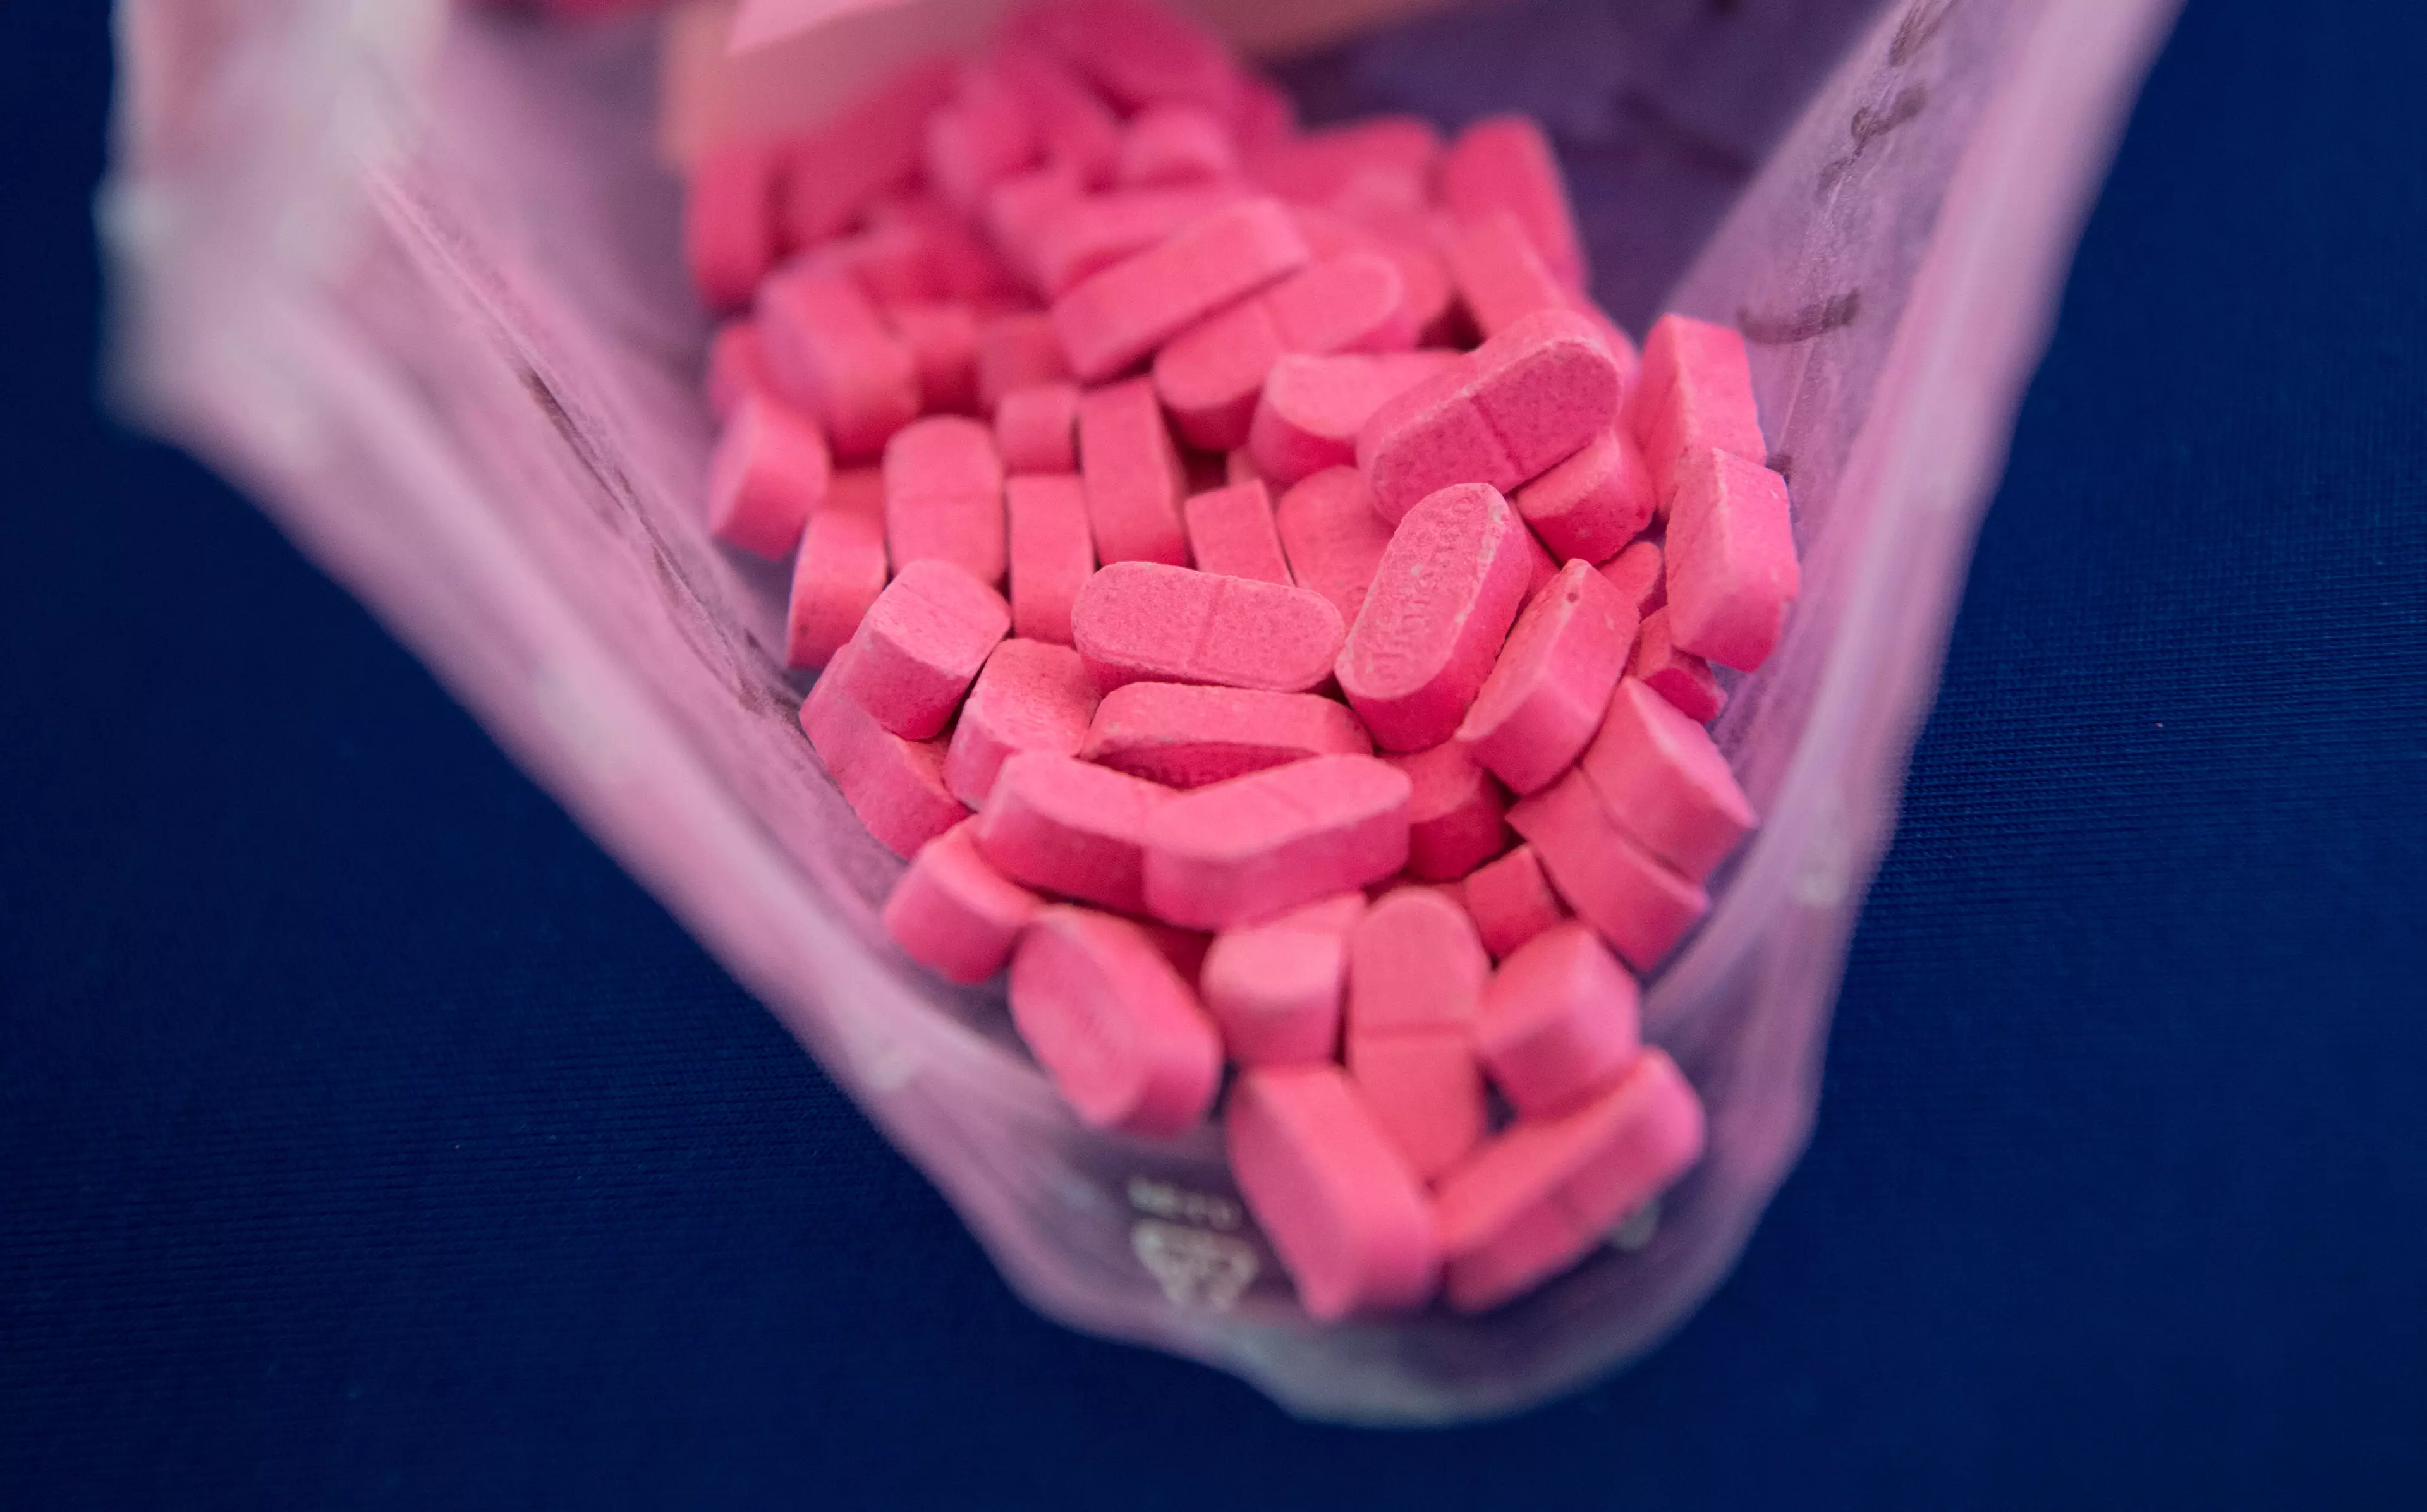 A new study suggests MDMA could be used to treat alcoholism.